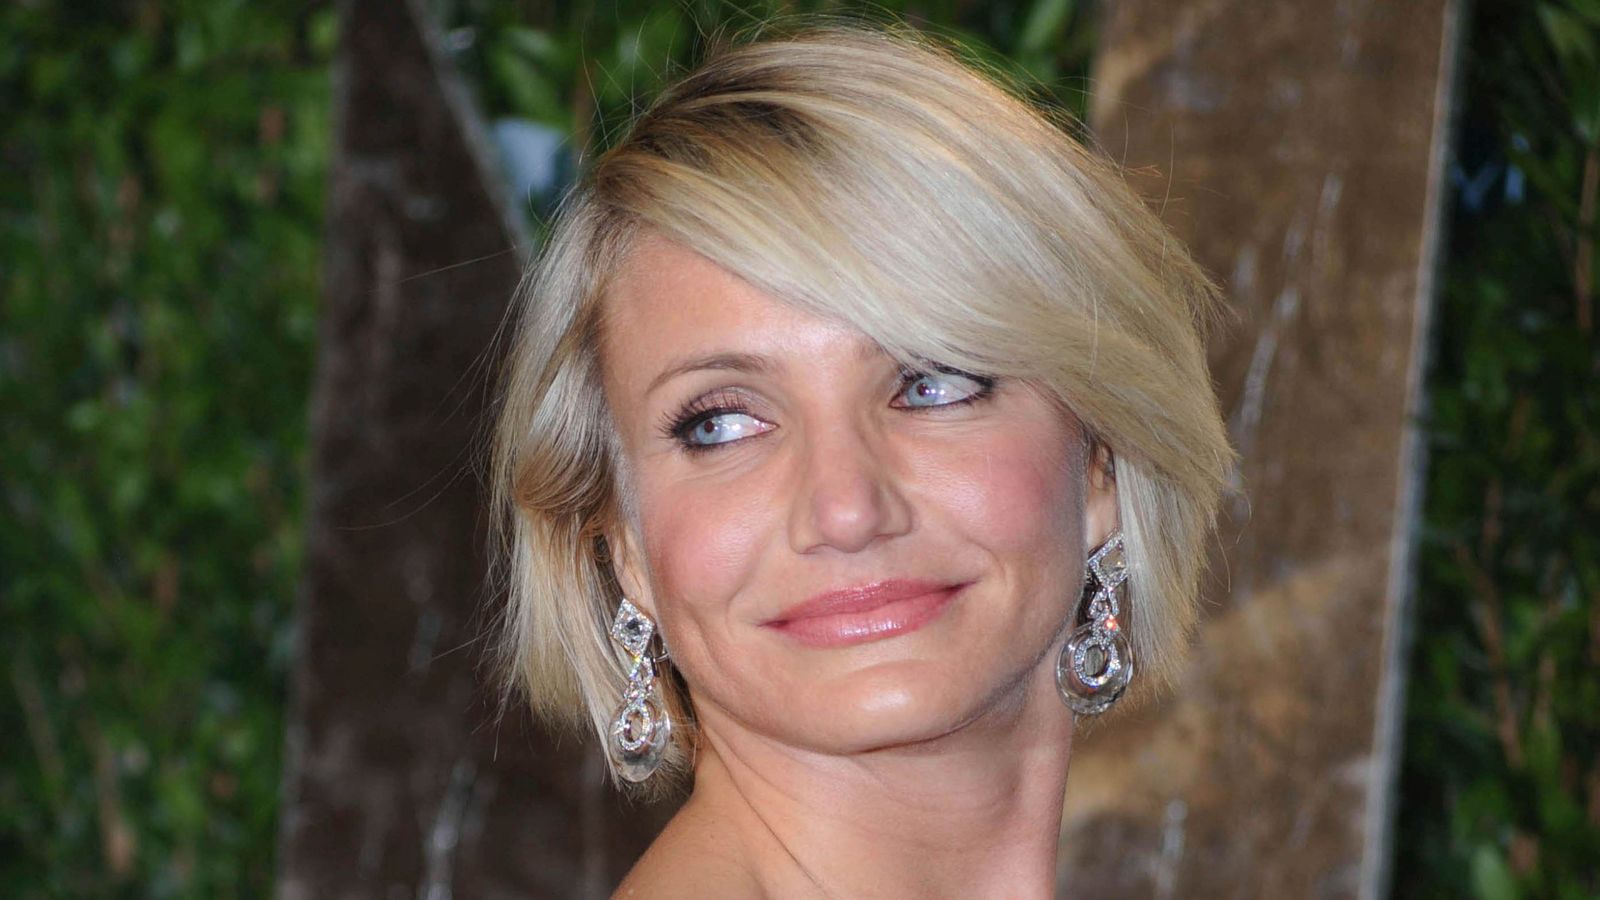 Cameron Diaz says long-term couples sleeping in separate bedrooms should be 'normalised'